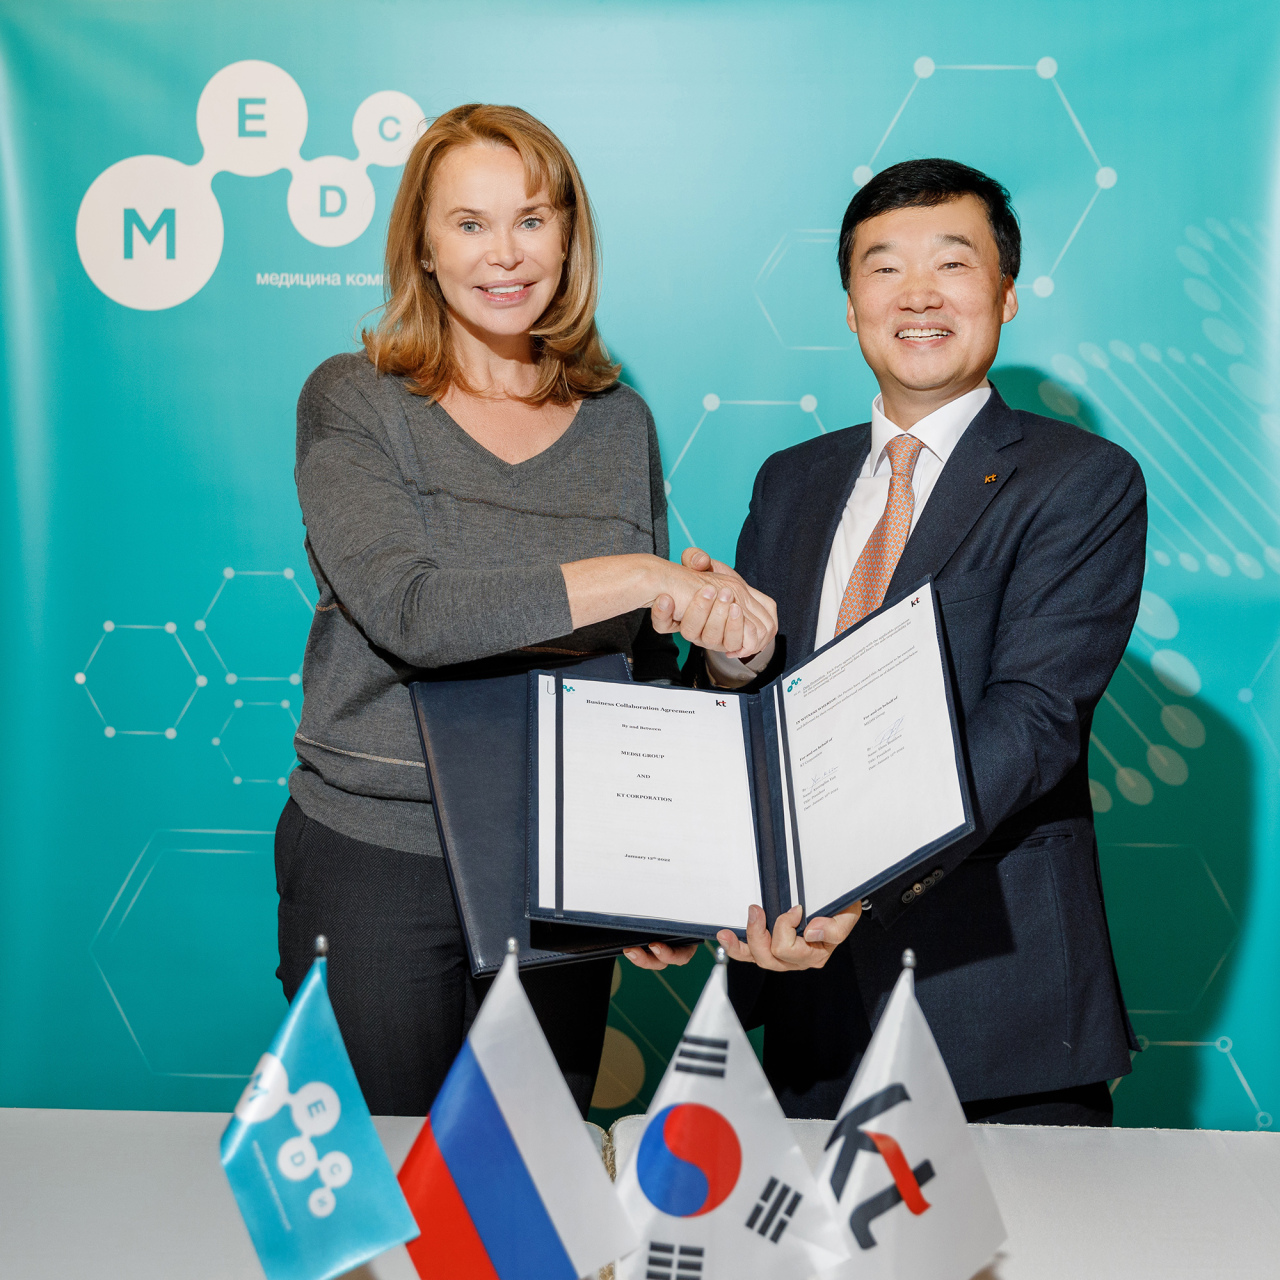 Medsi Group Chairwoman Elena Brusilova (left) and KT’s head of group transformation Yoon Kyung-lim pose for a photo during a signing ceremony held at Sistema headquarters in Moscow. (KT)